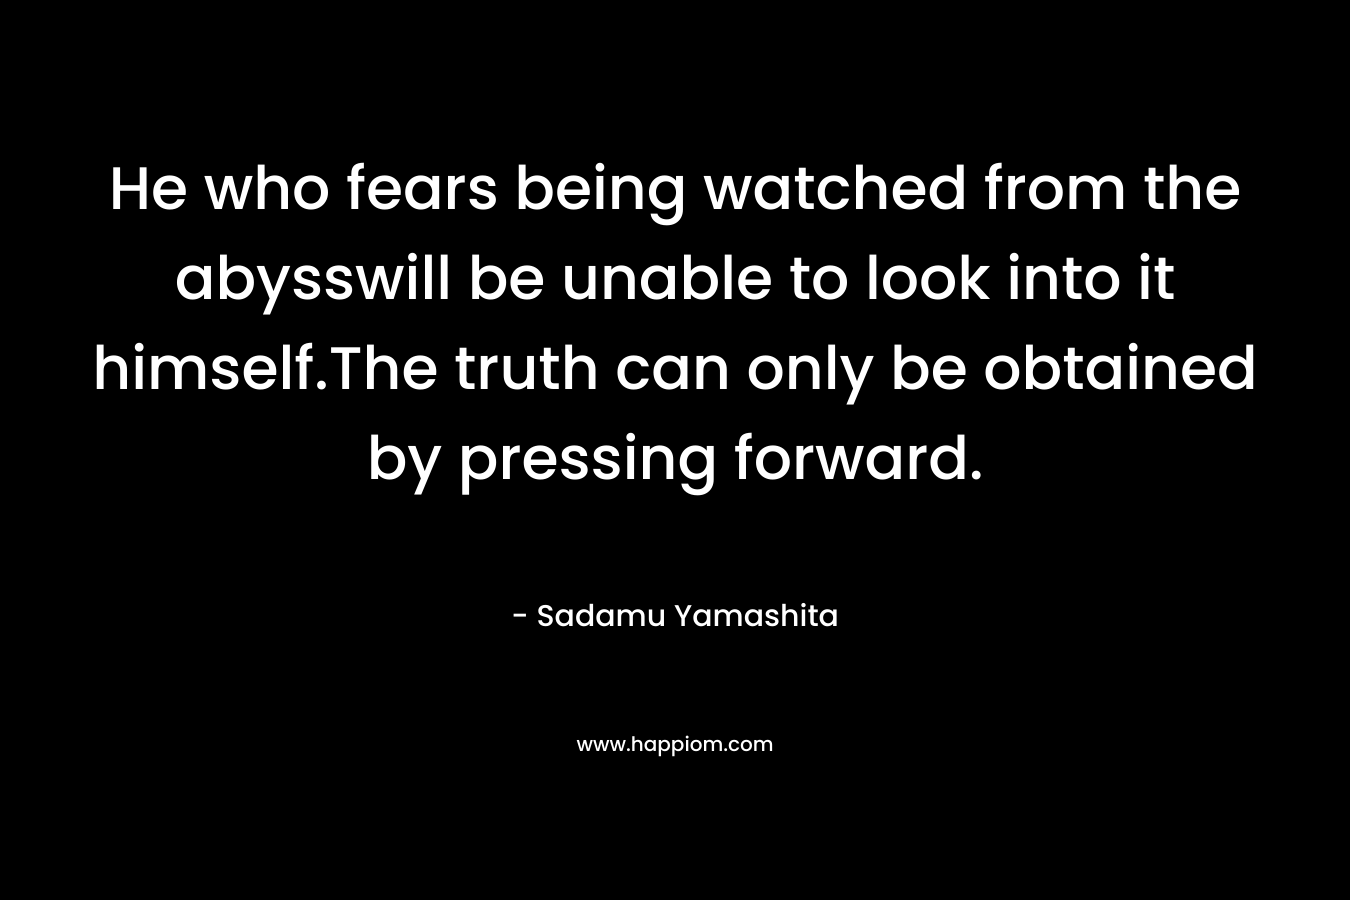 He who fears being watched from the abysswill be unable to look into it himself.The truth can only be obtained by pressing forward.